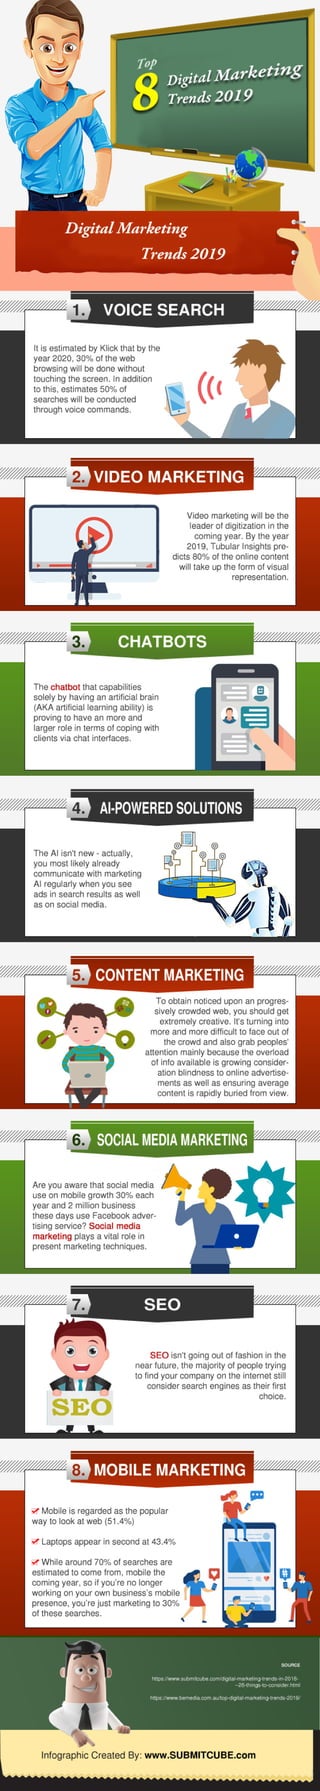 Digital Marketing Trends for 2019 [Infographic]